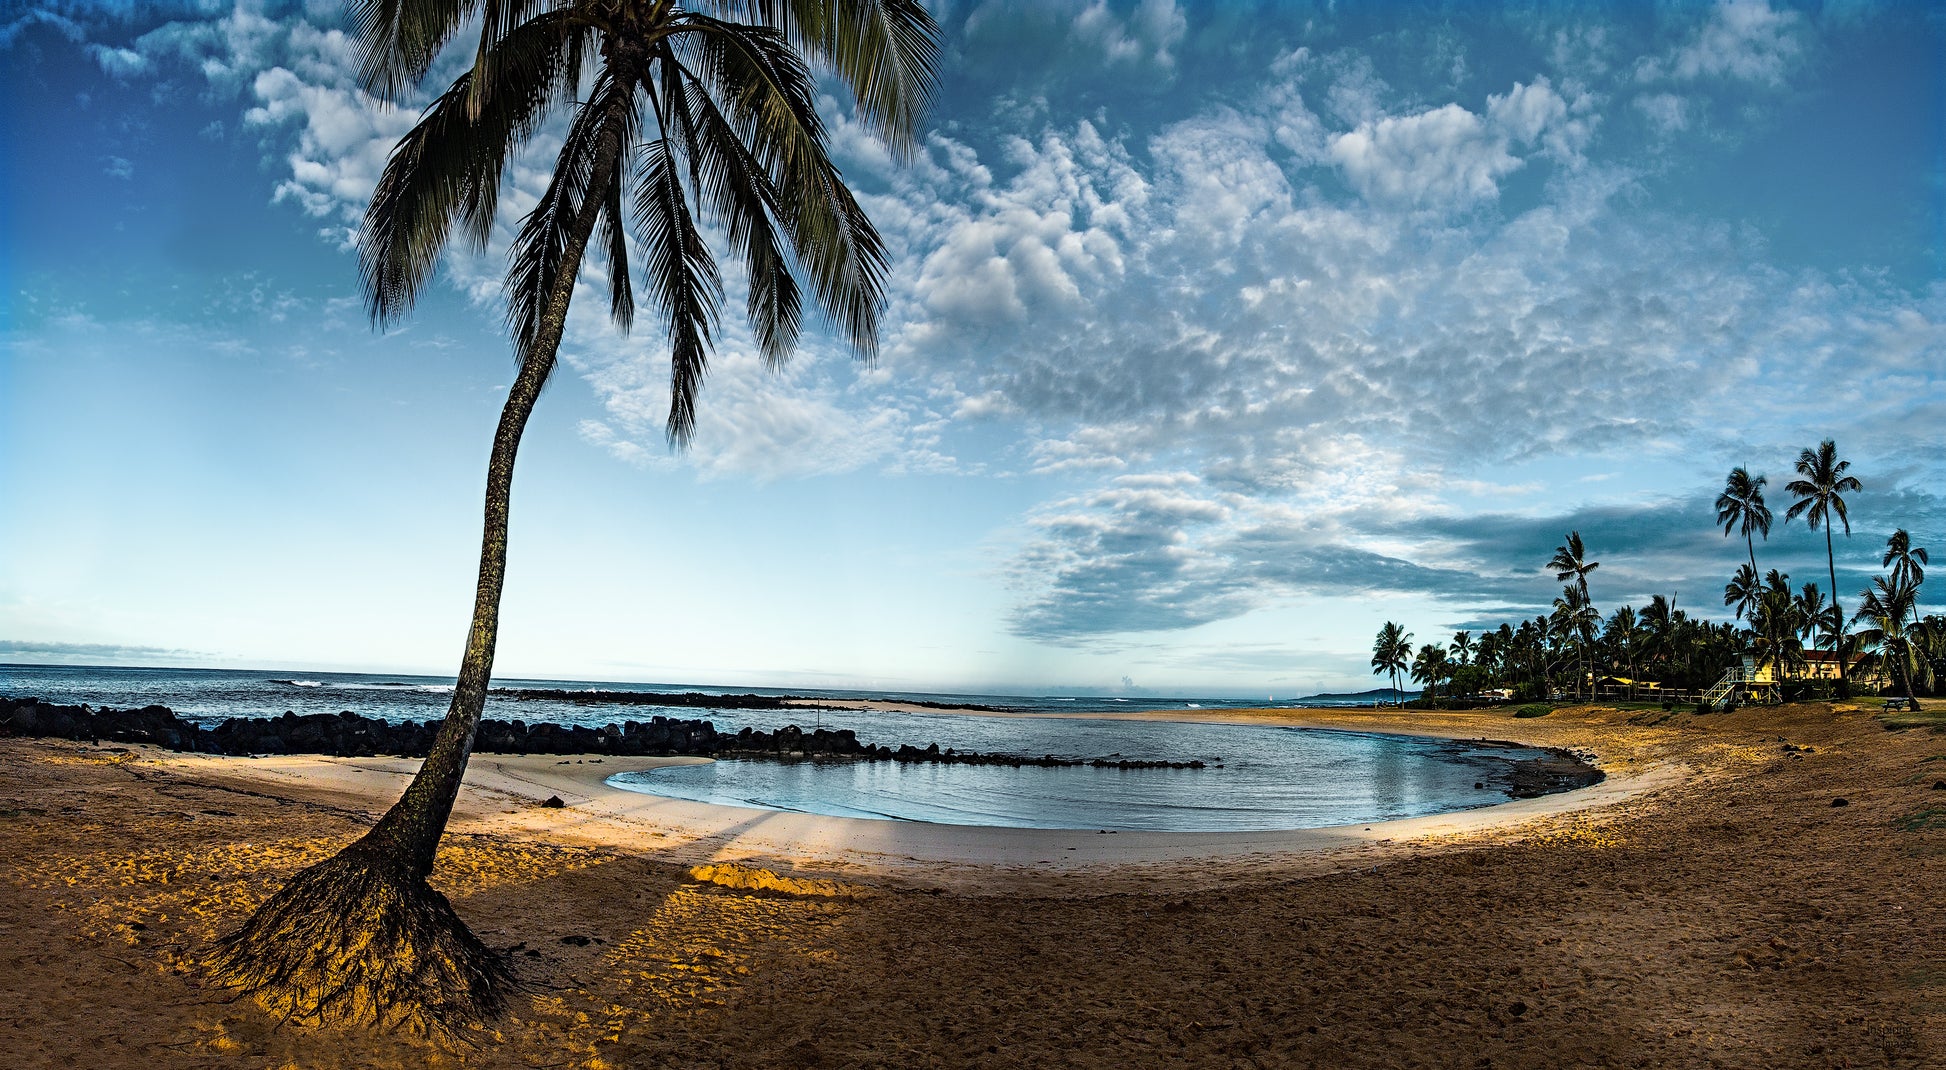 Fine art photograph of Kauai’s popular popular Poipu Beach. The empty early morning beach is shaded by a palm tree in this landscape photograph by Inspiring Images Hawaii.